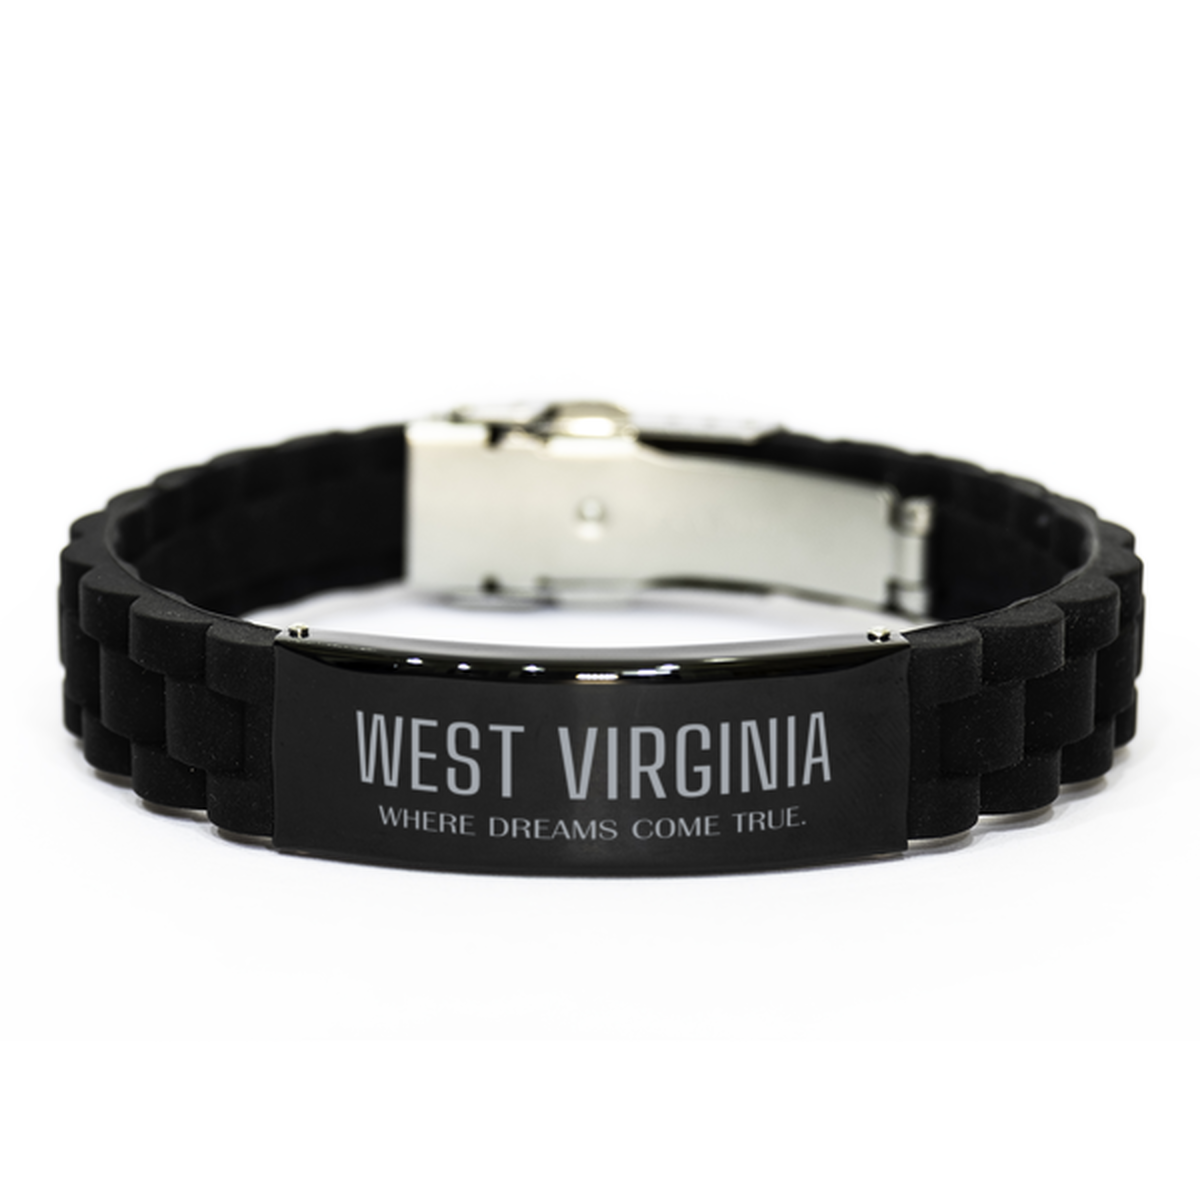 Love West Virginia State Black Glidelock Clasp Bracelet, West Virginia Where dreams come true, Birthday Inspirational Gifts For West Virginia Men, Women, Friends